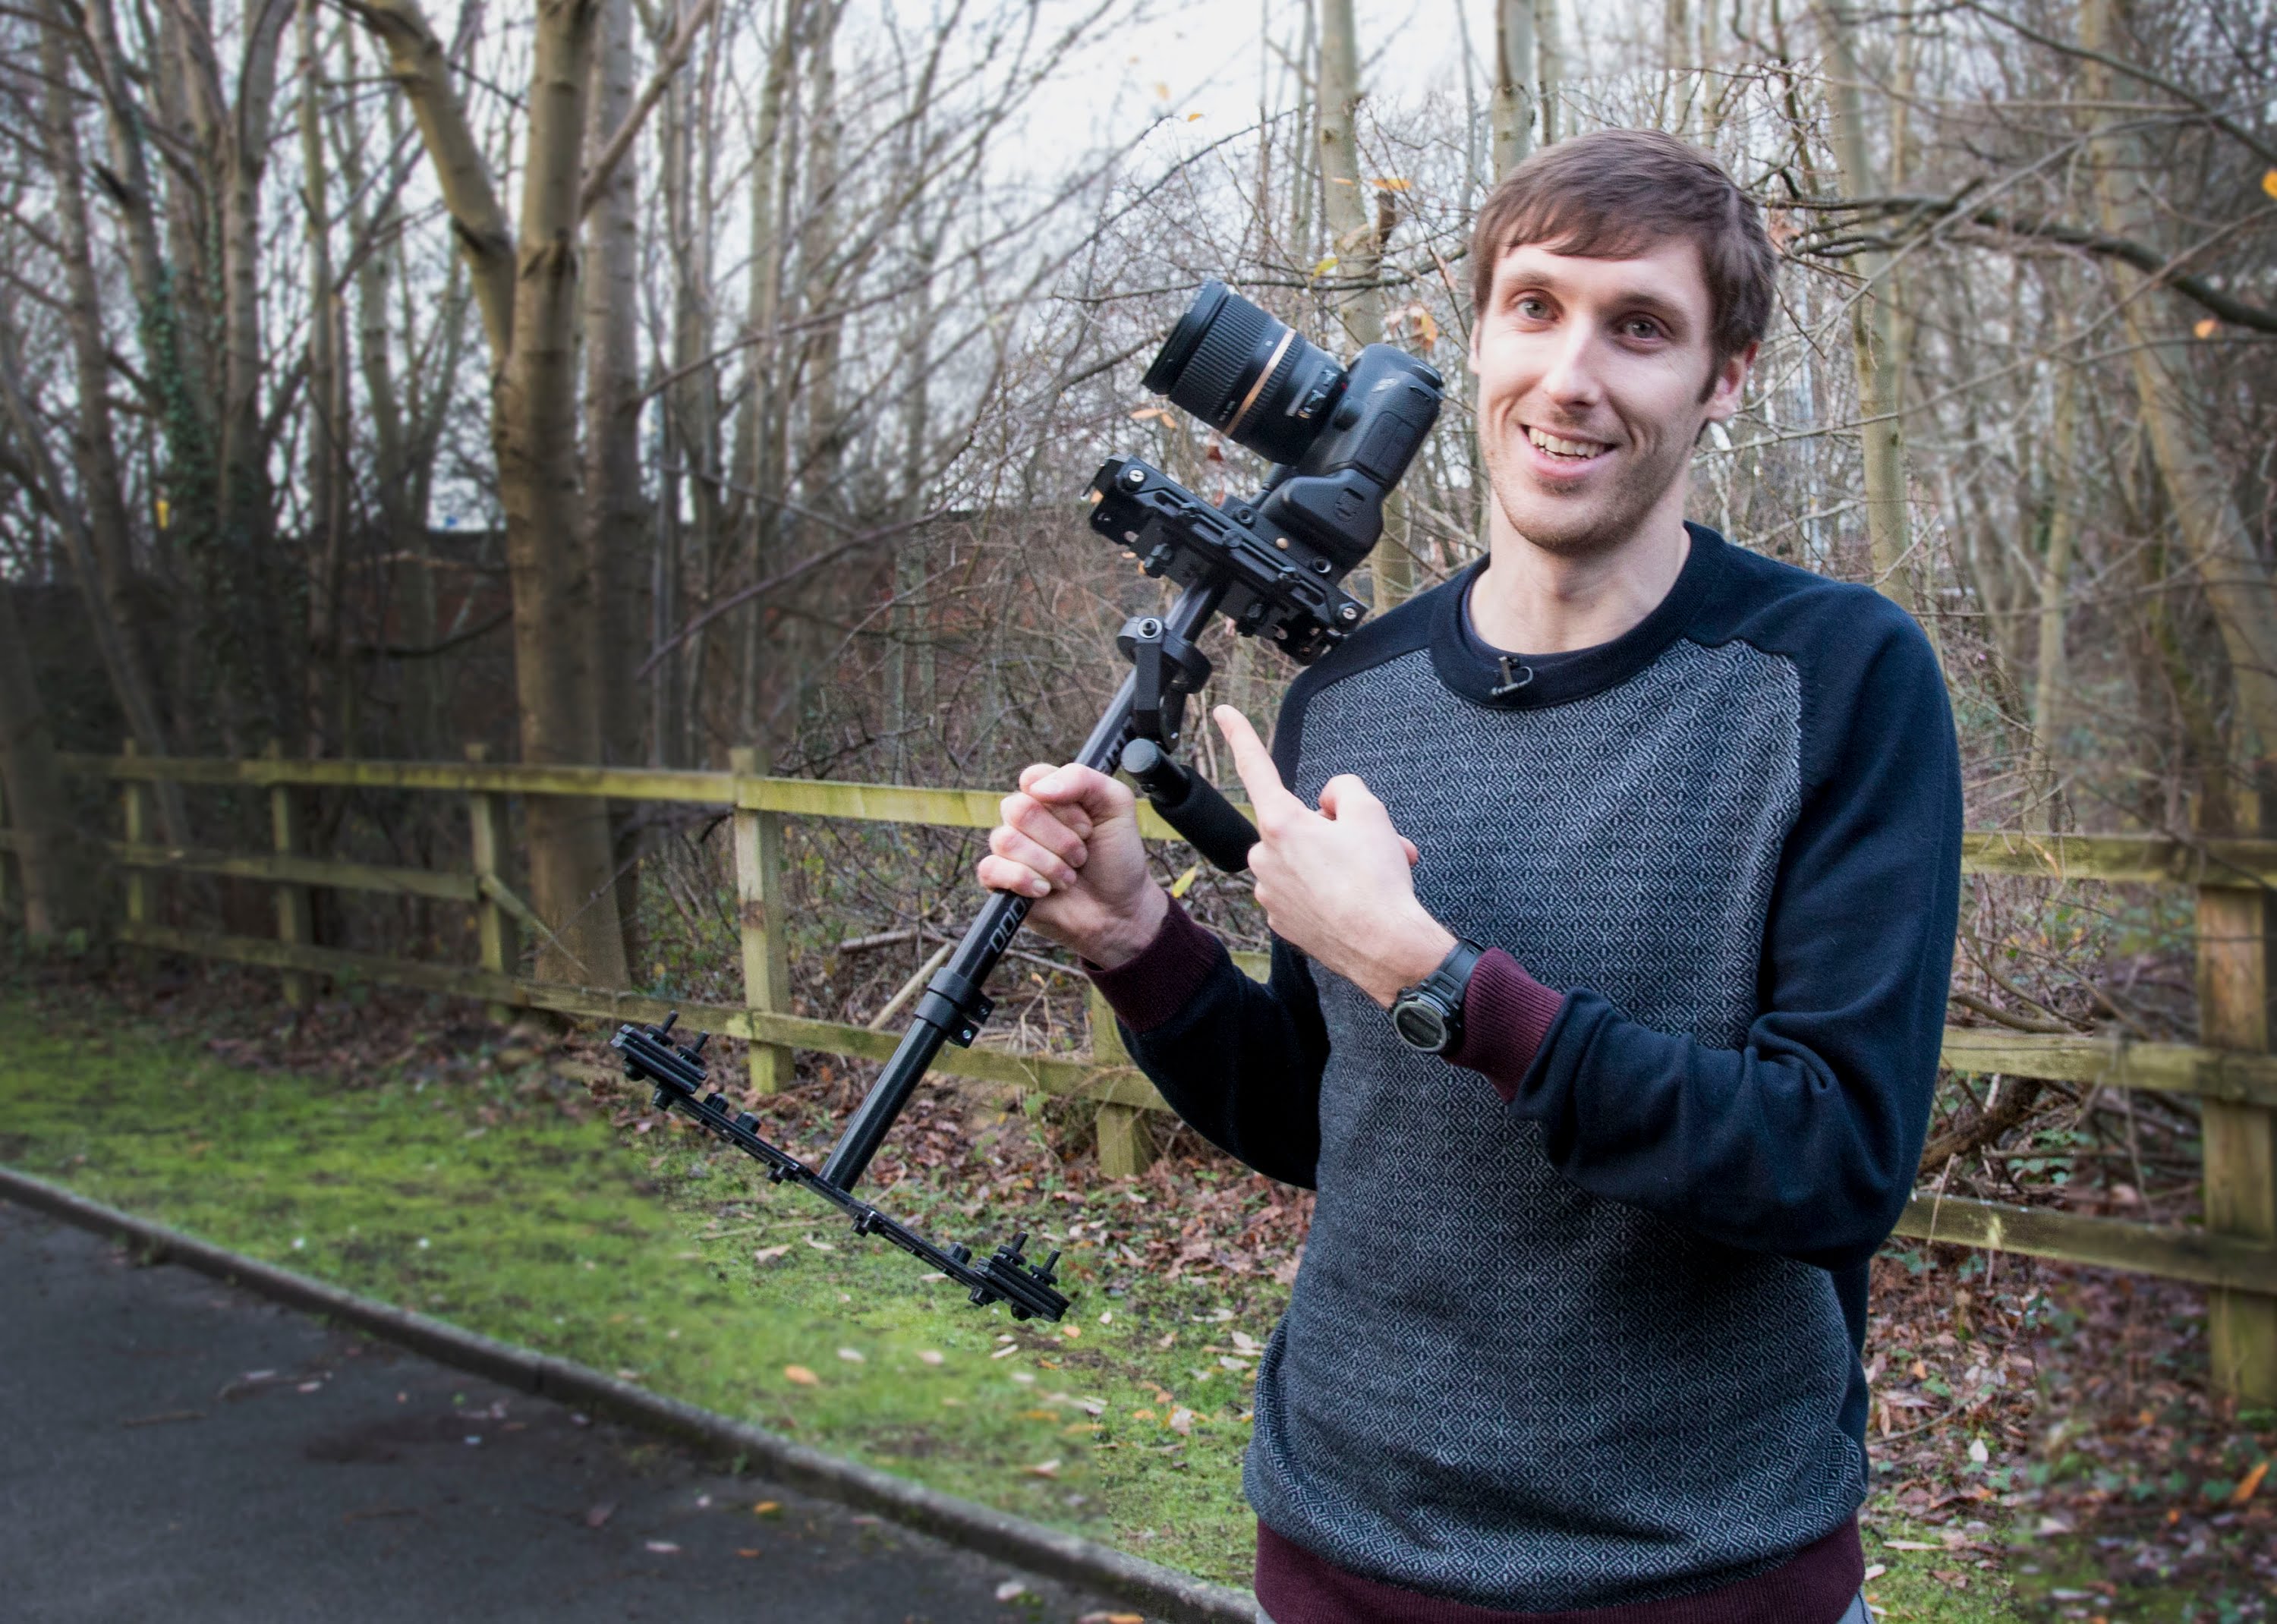 Glidecam Tutorial: How to operate a Glidecam with your DSLR